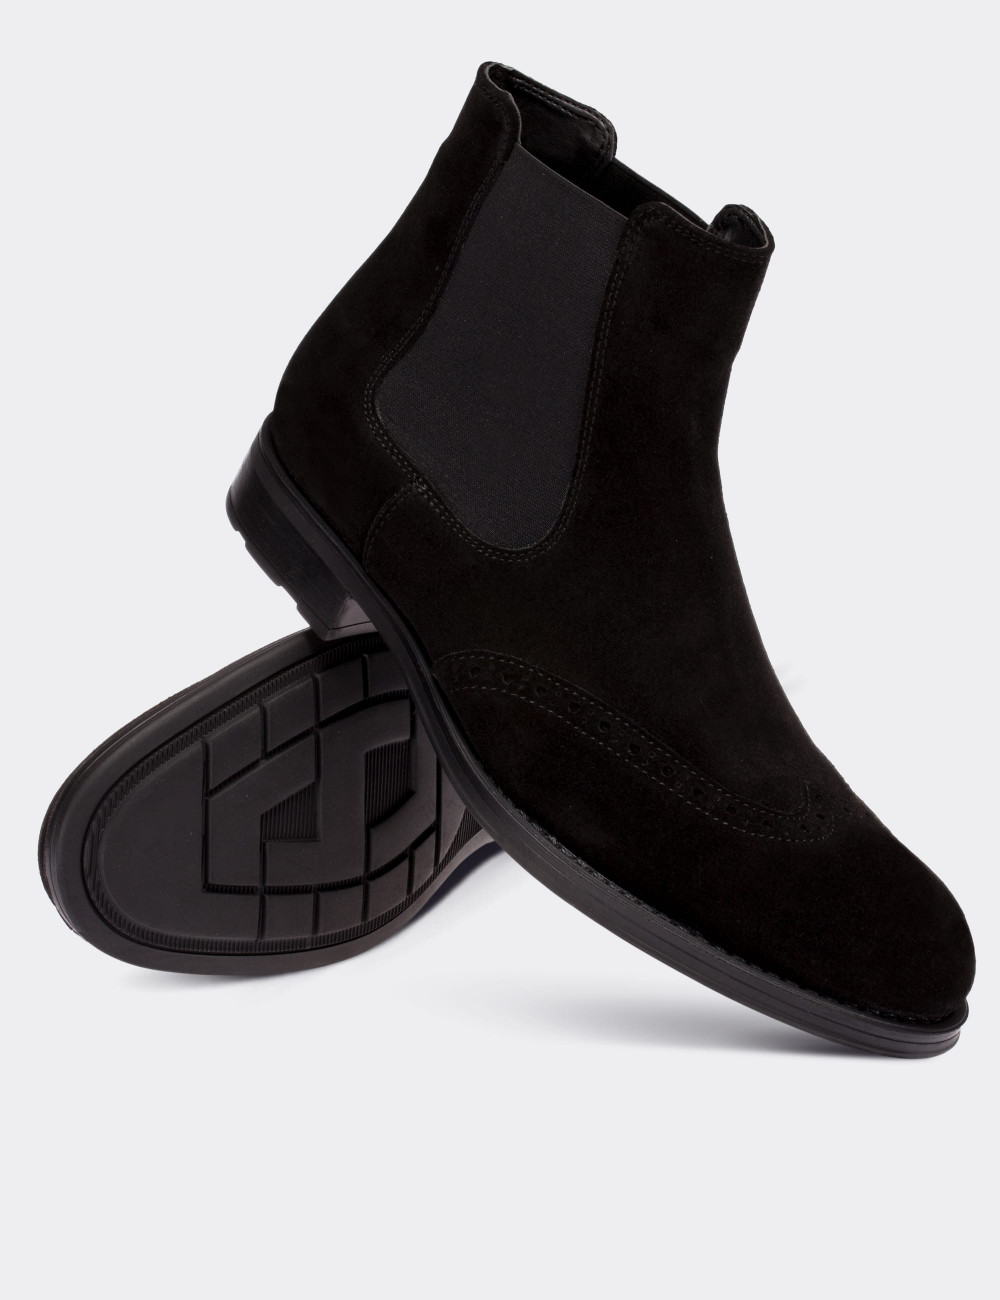 Black Suede Leather Chelsea Boots - 01622MSYHC01